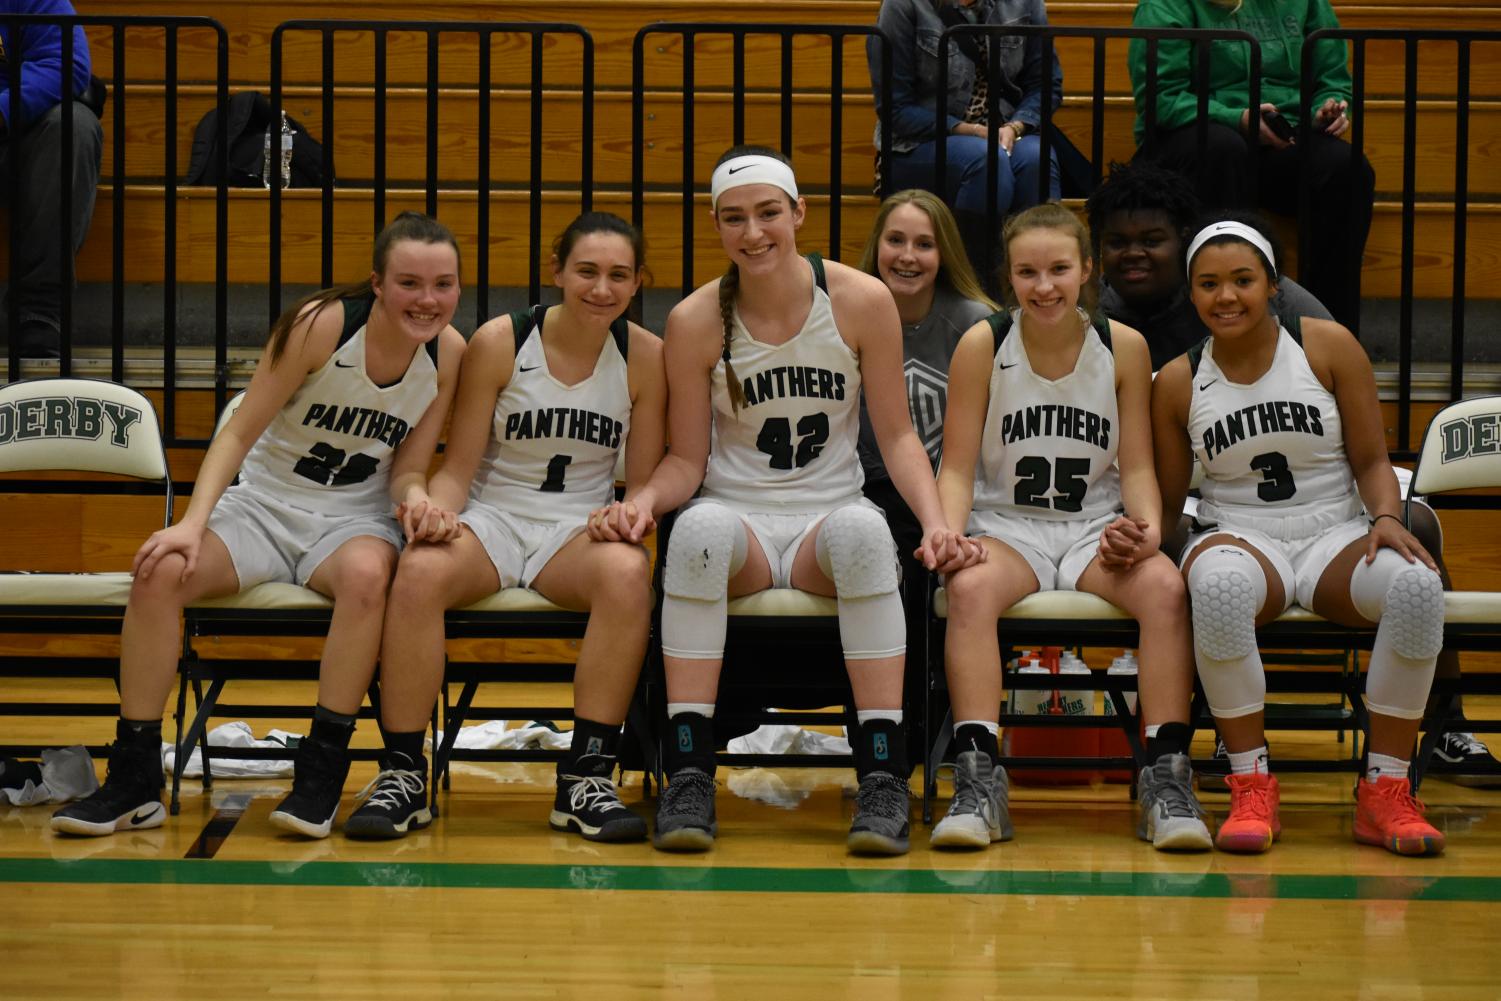 Girls+basketball+Sub-State+vs+Campus+%28photo+gallery+by+Damien+Matmanivong%29